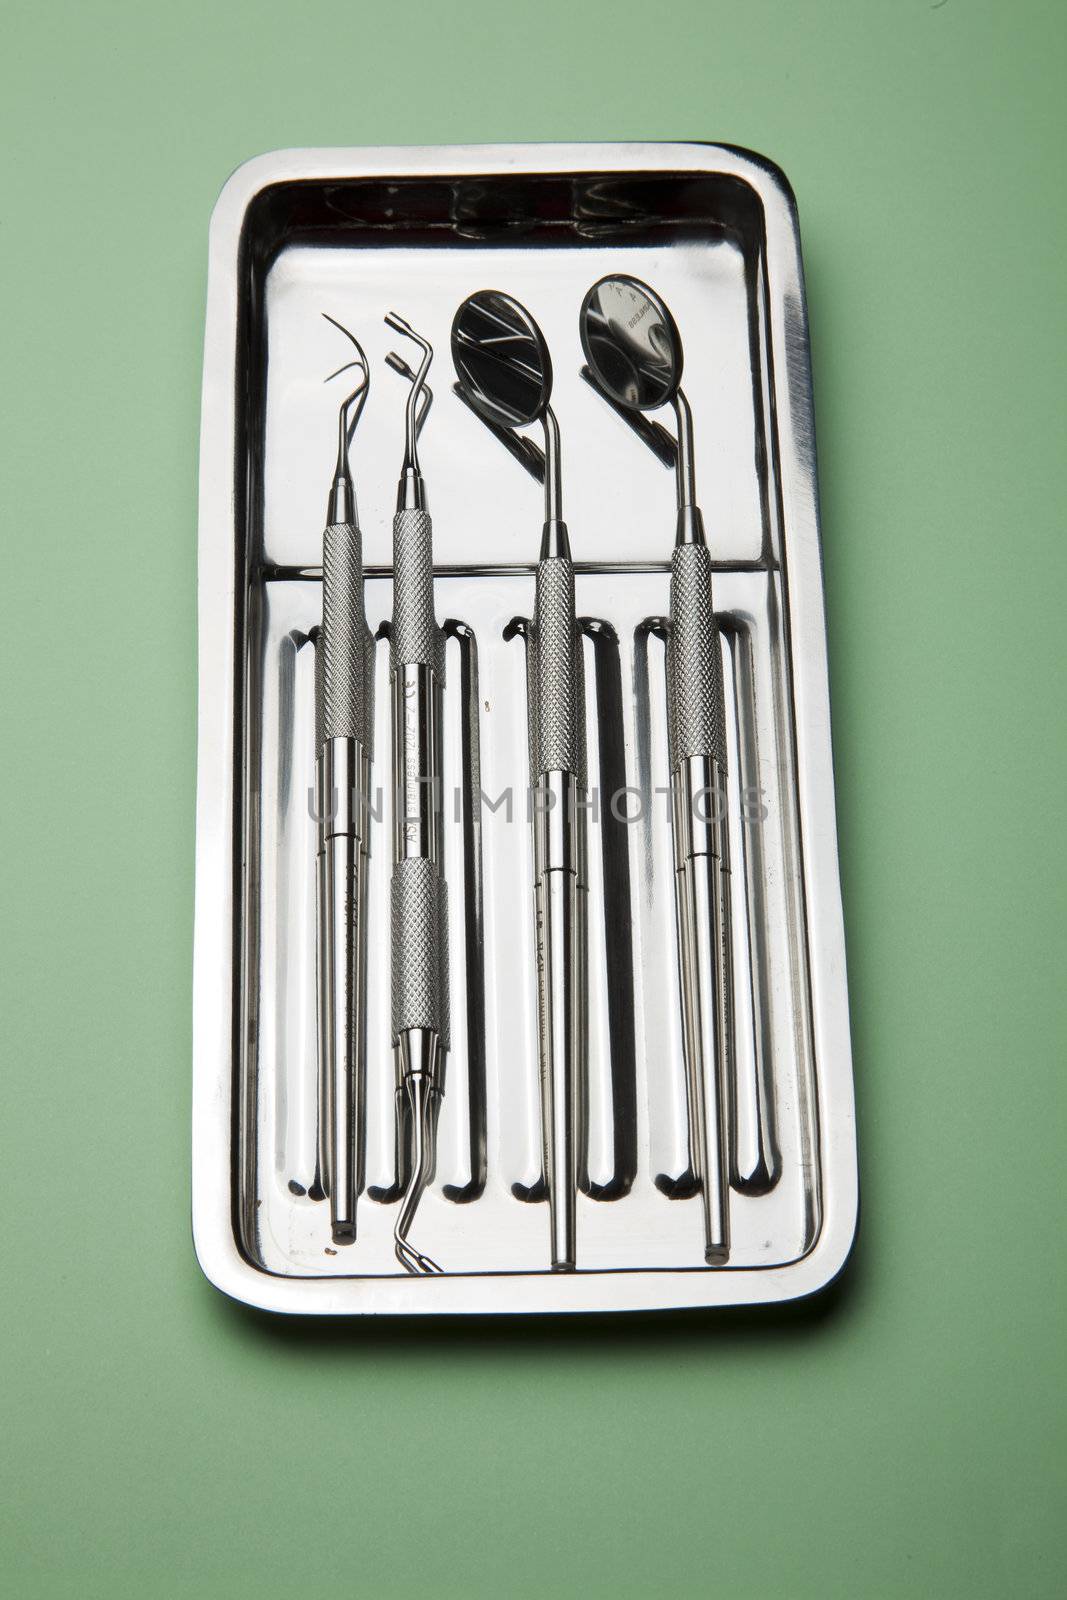 Dental Instruments - angled mirrors, plate, tools